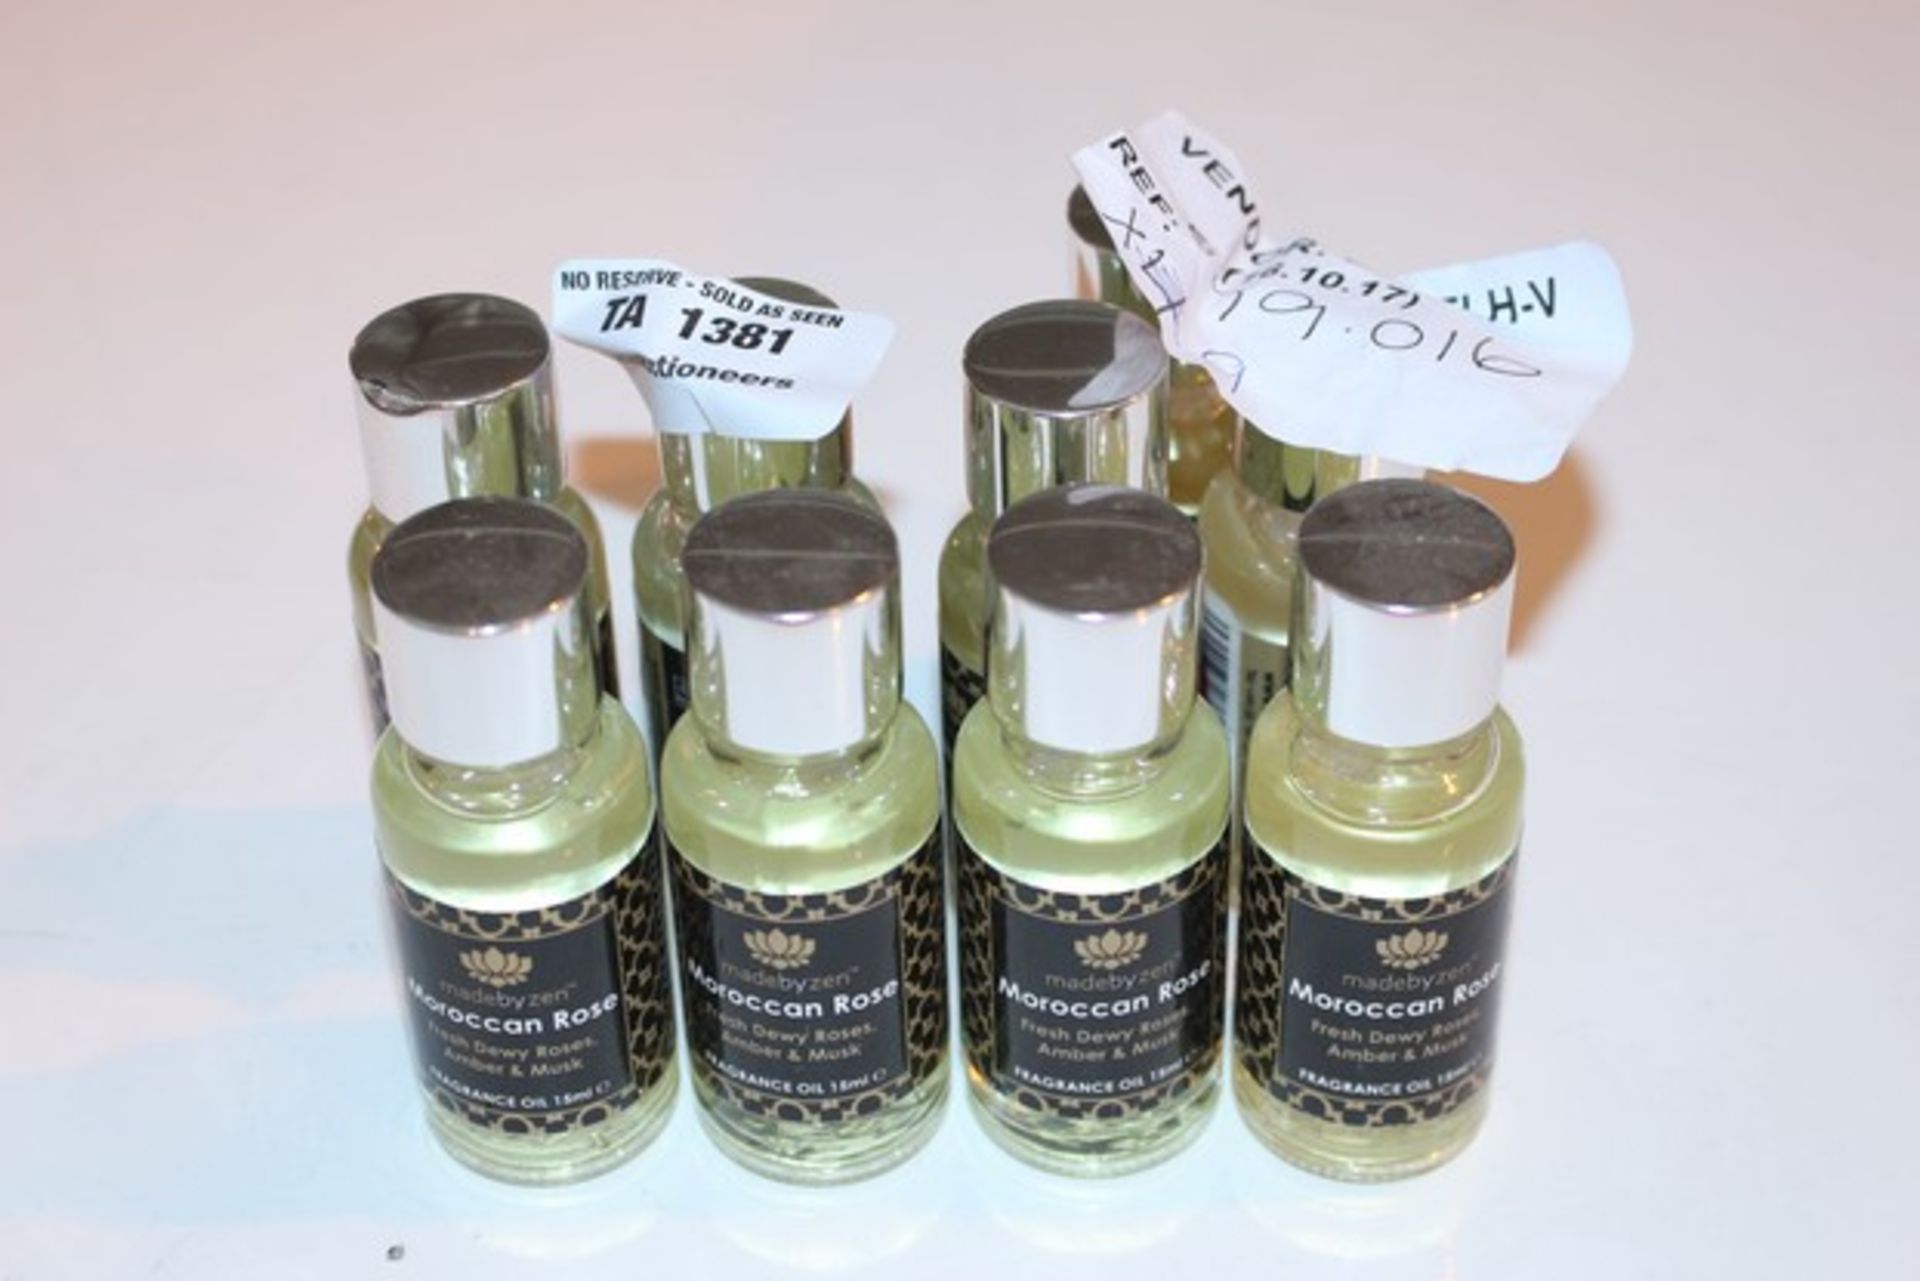 1 LOT TO CONTAIN 9 BOTTLES OF MADE BY ZEN MOROCCAN ROSE FRESH DEWY ROSES AND AMBER MUSK FRAGRANCE